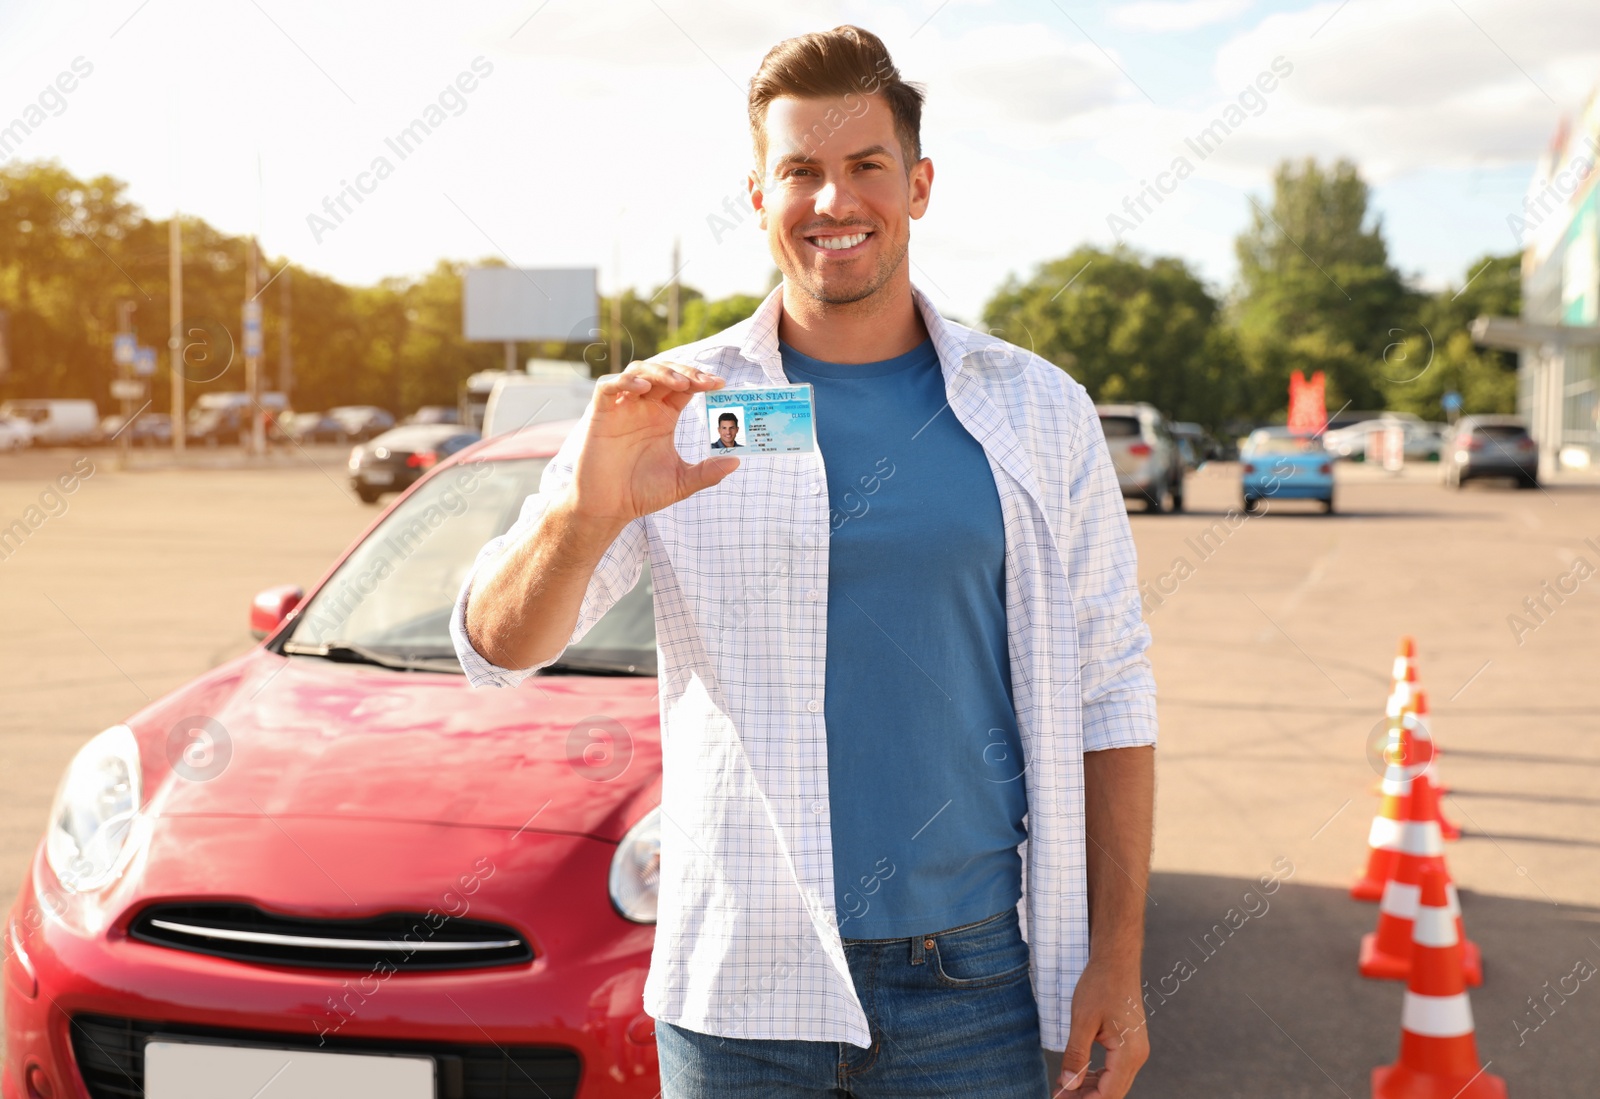 Photo of Man with license near car outdoors. Driving school